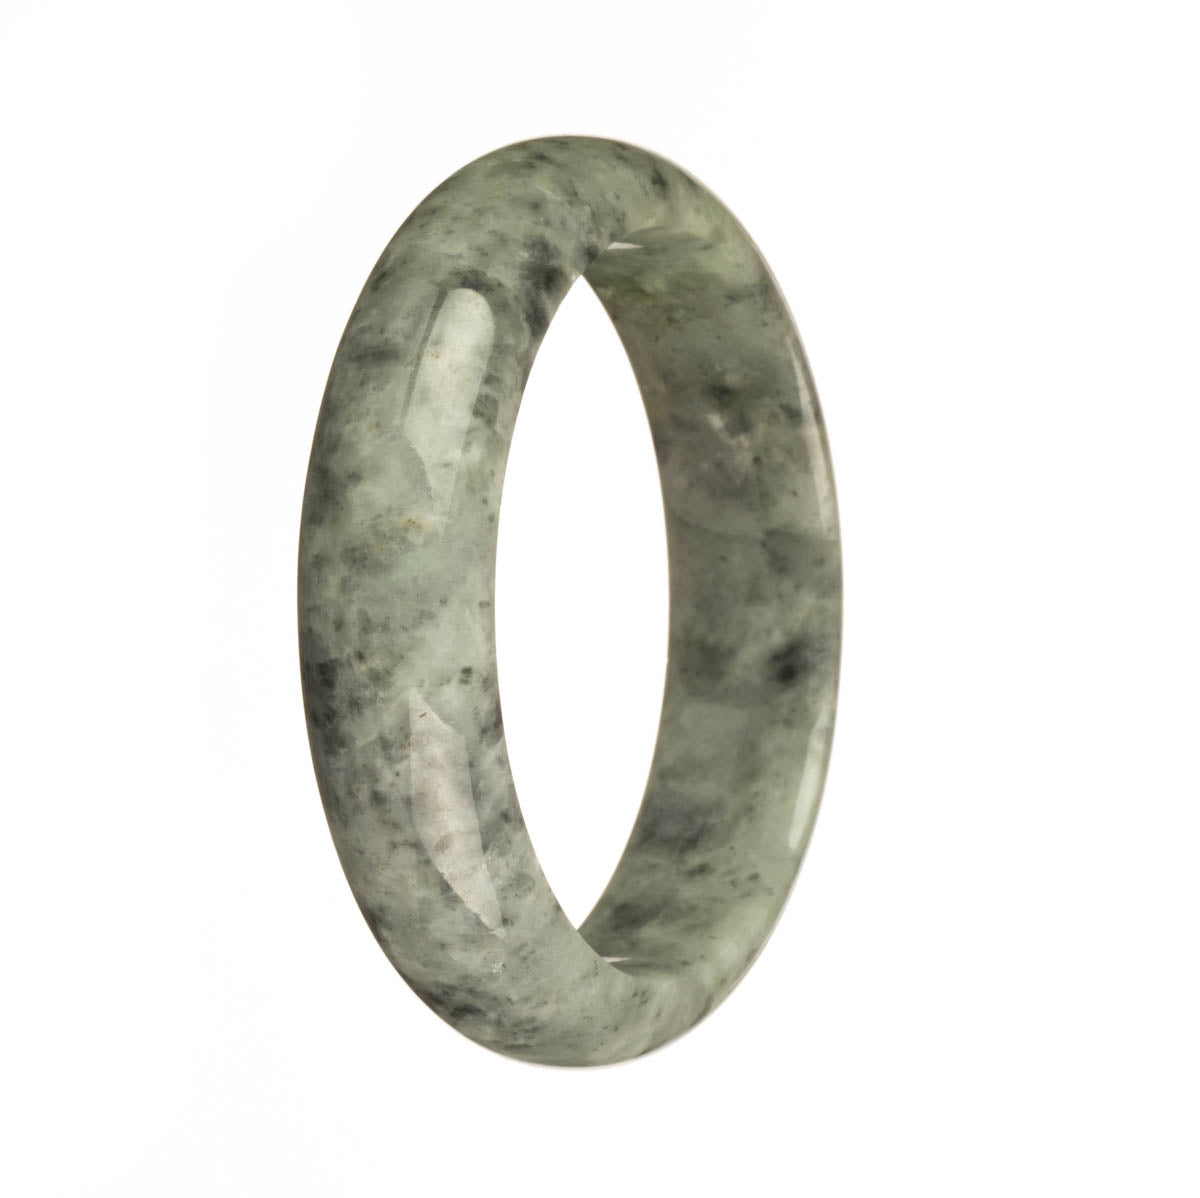 A close-up of a beautiful grey jade bangle bracelet with a unique pattern resembling half moon shapes. The bracelet is made with genuine natural jade and has a diameter of 59mm. Sold by MAYS GEMS.